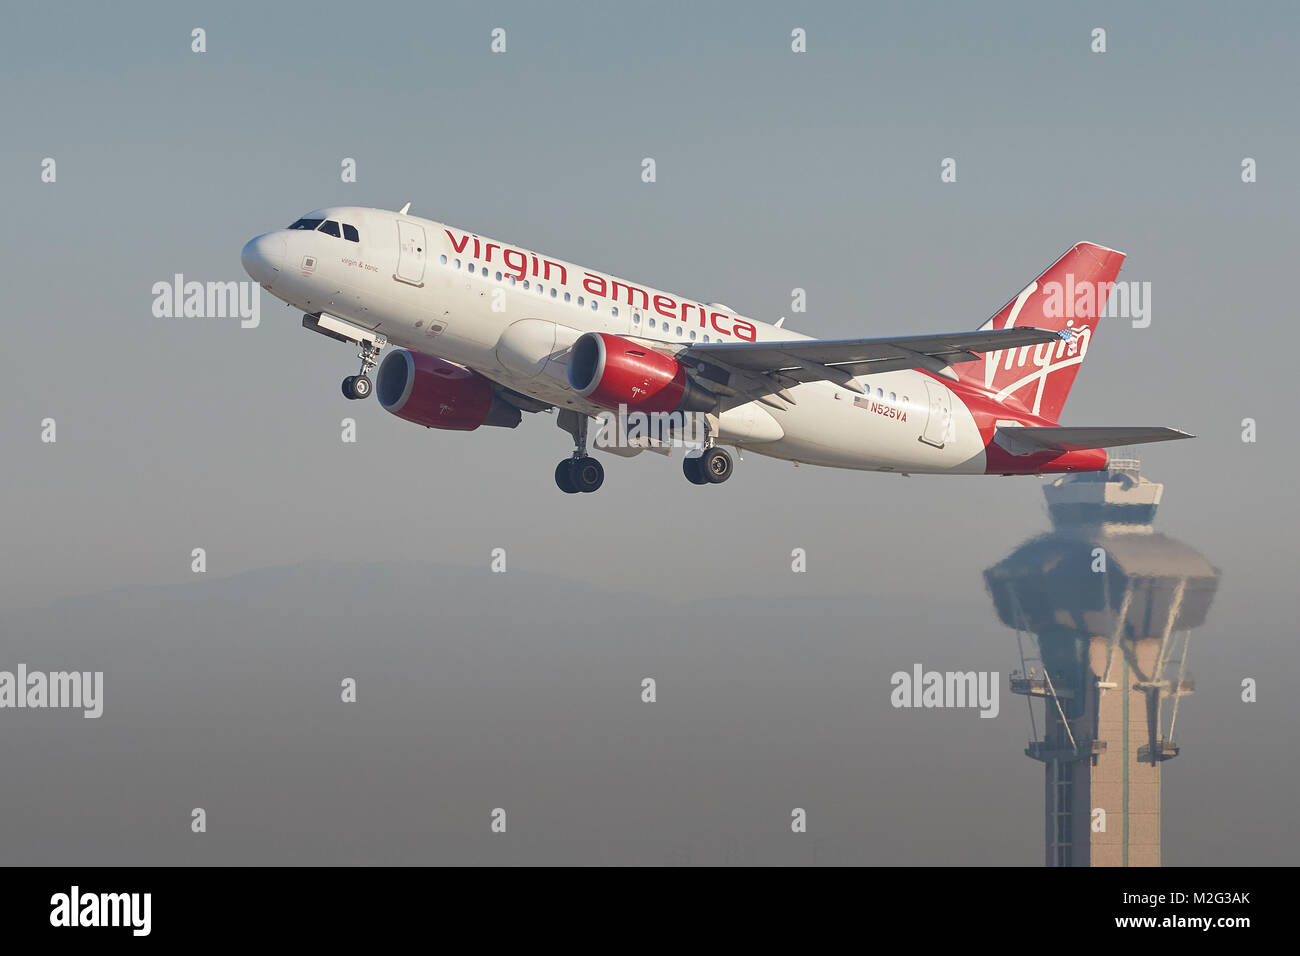 Virgin America Airbus A319 Taking Off From  Runway 25 Left At Los Angeles International Airport, The Air Traffic Control Tower In Background. Stock Photo